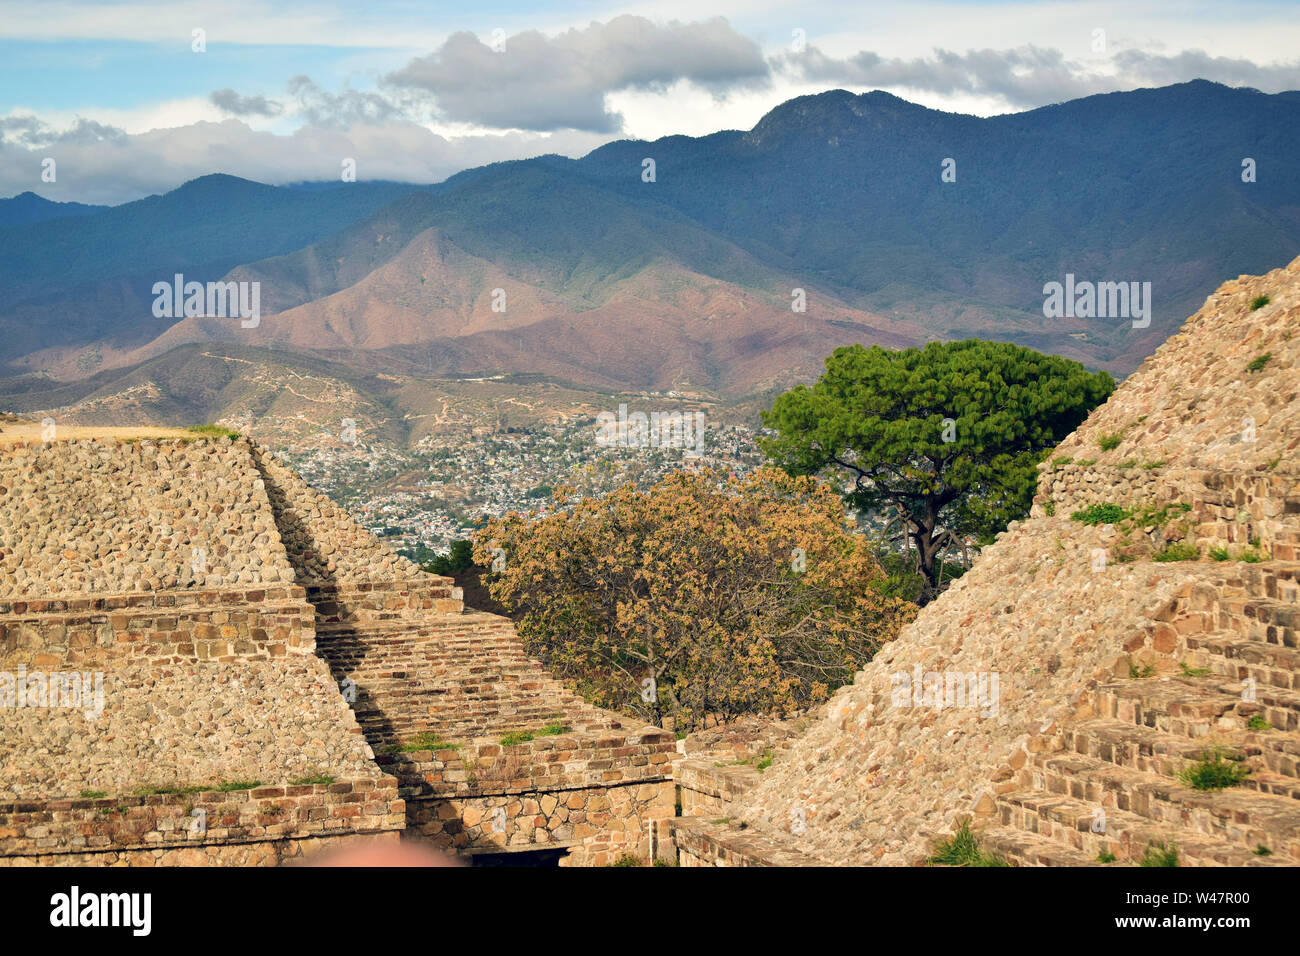 View of the ancient pyramids of Teotihuacan with Valley of Mexico mountains in the background. Stock Photo